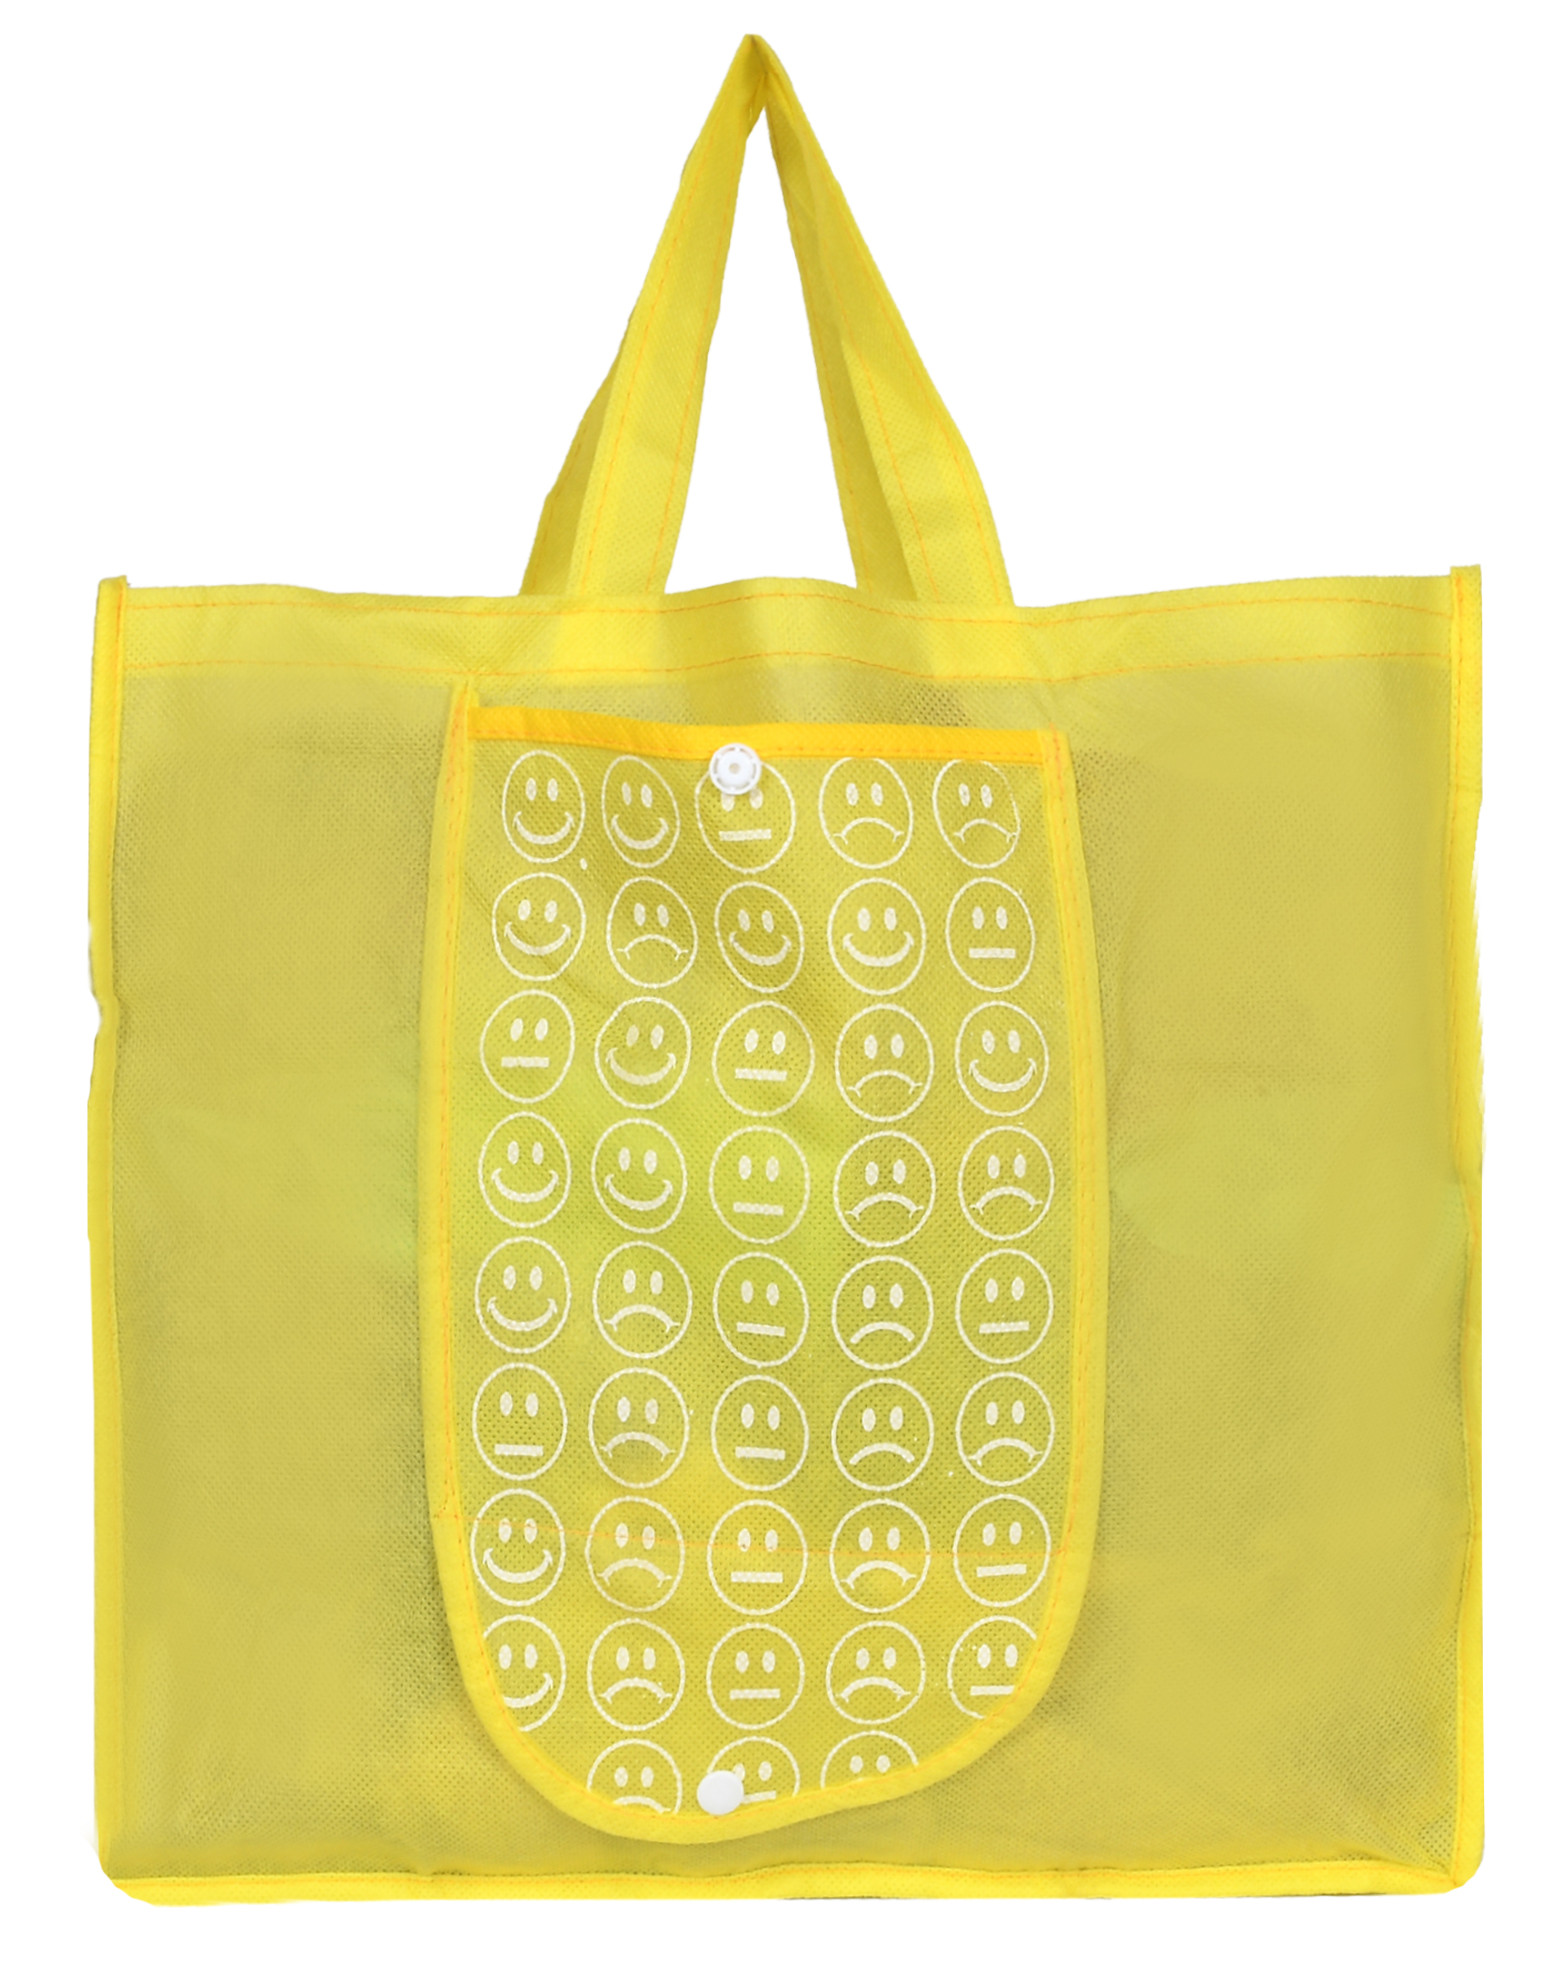 Kuber Industries Shopping Grocery Bags Foldable, Washable Grocery Tote Bag with One Small Pocket, Eco-Friendly Purse Bag Fits in Pocket Waterproof & Lightweight (Pink & Yellow & Blue)